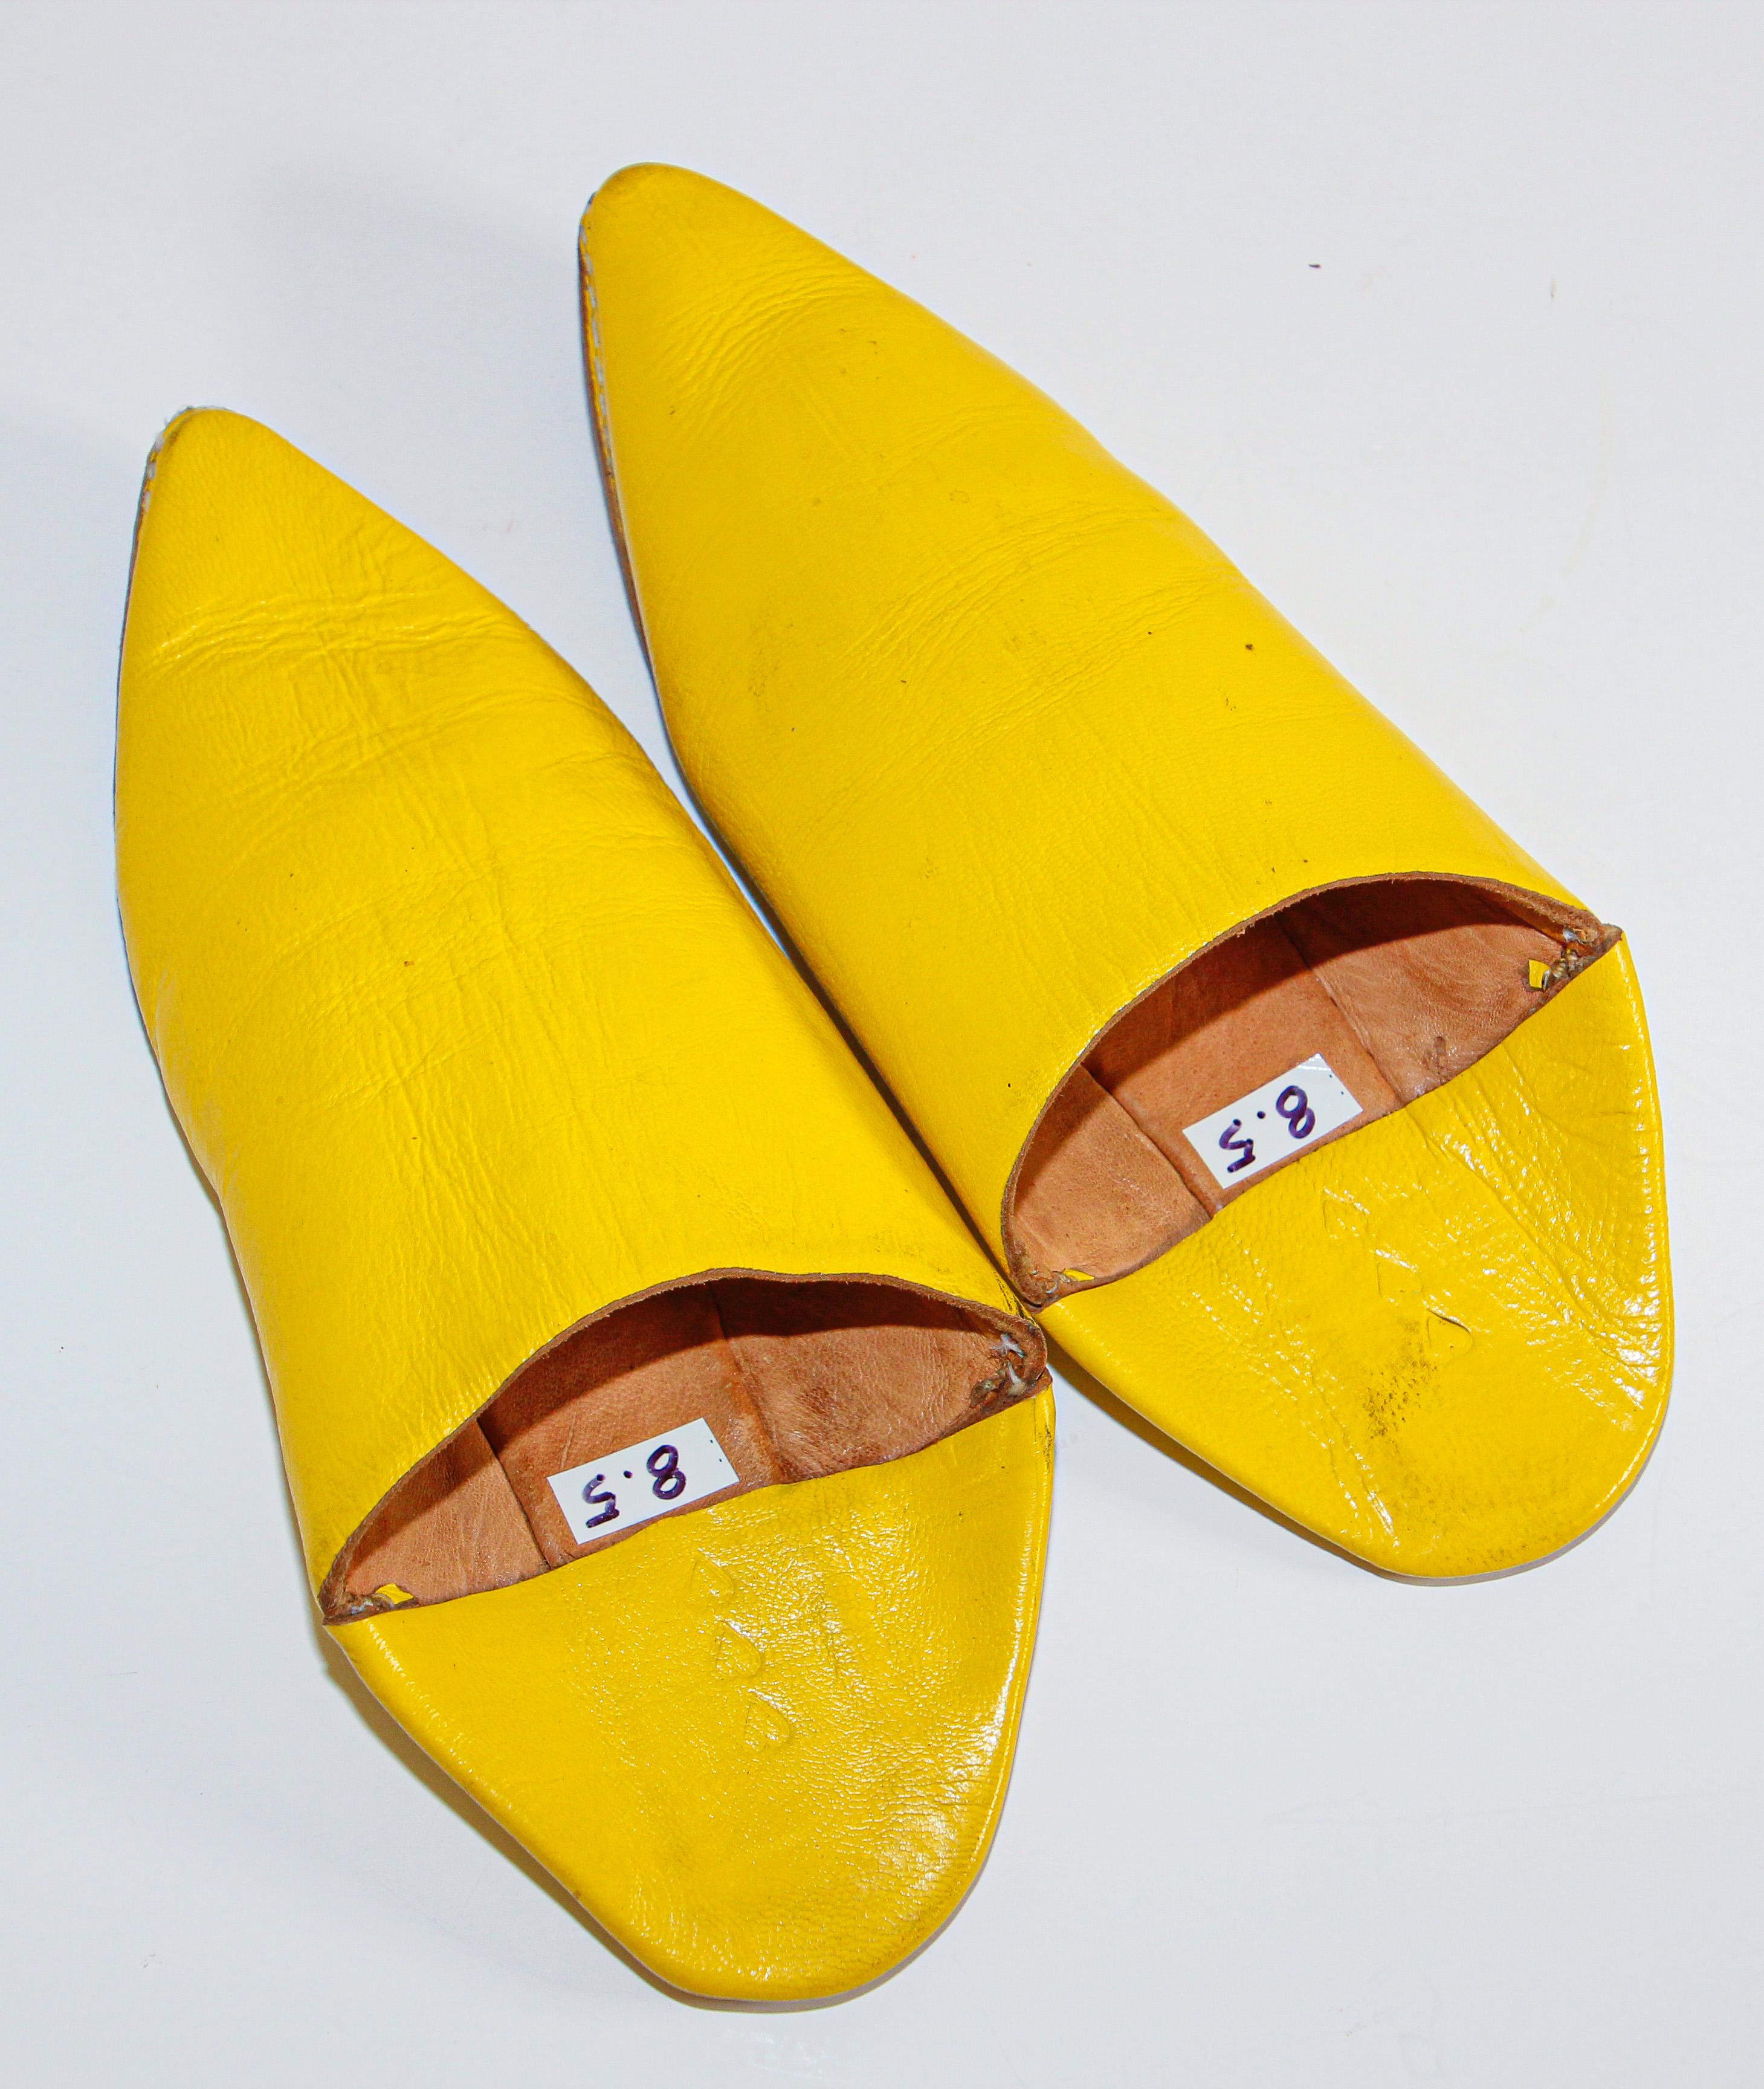 yellow pointed shoes